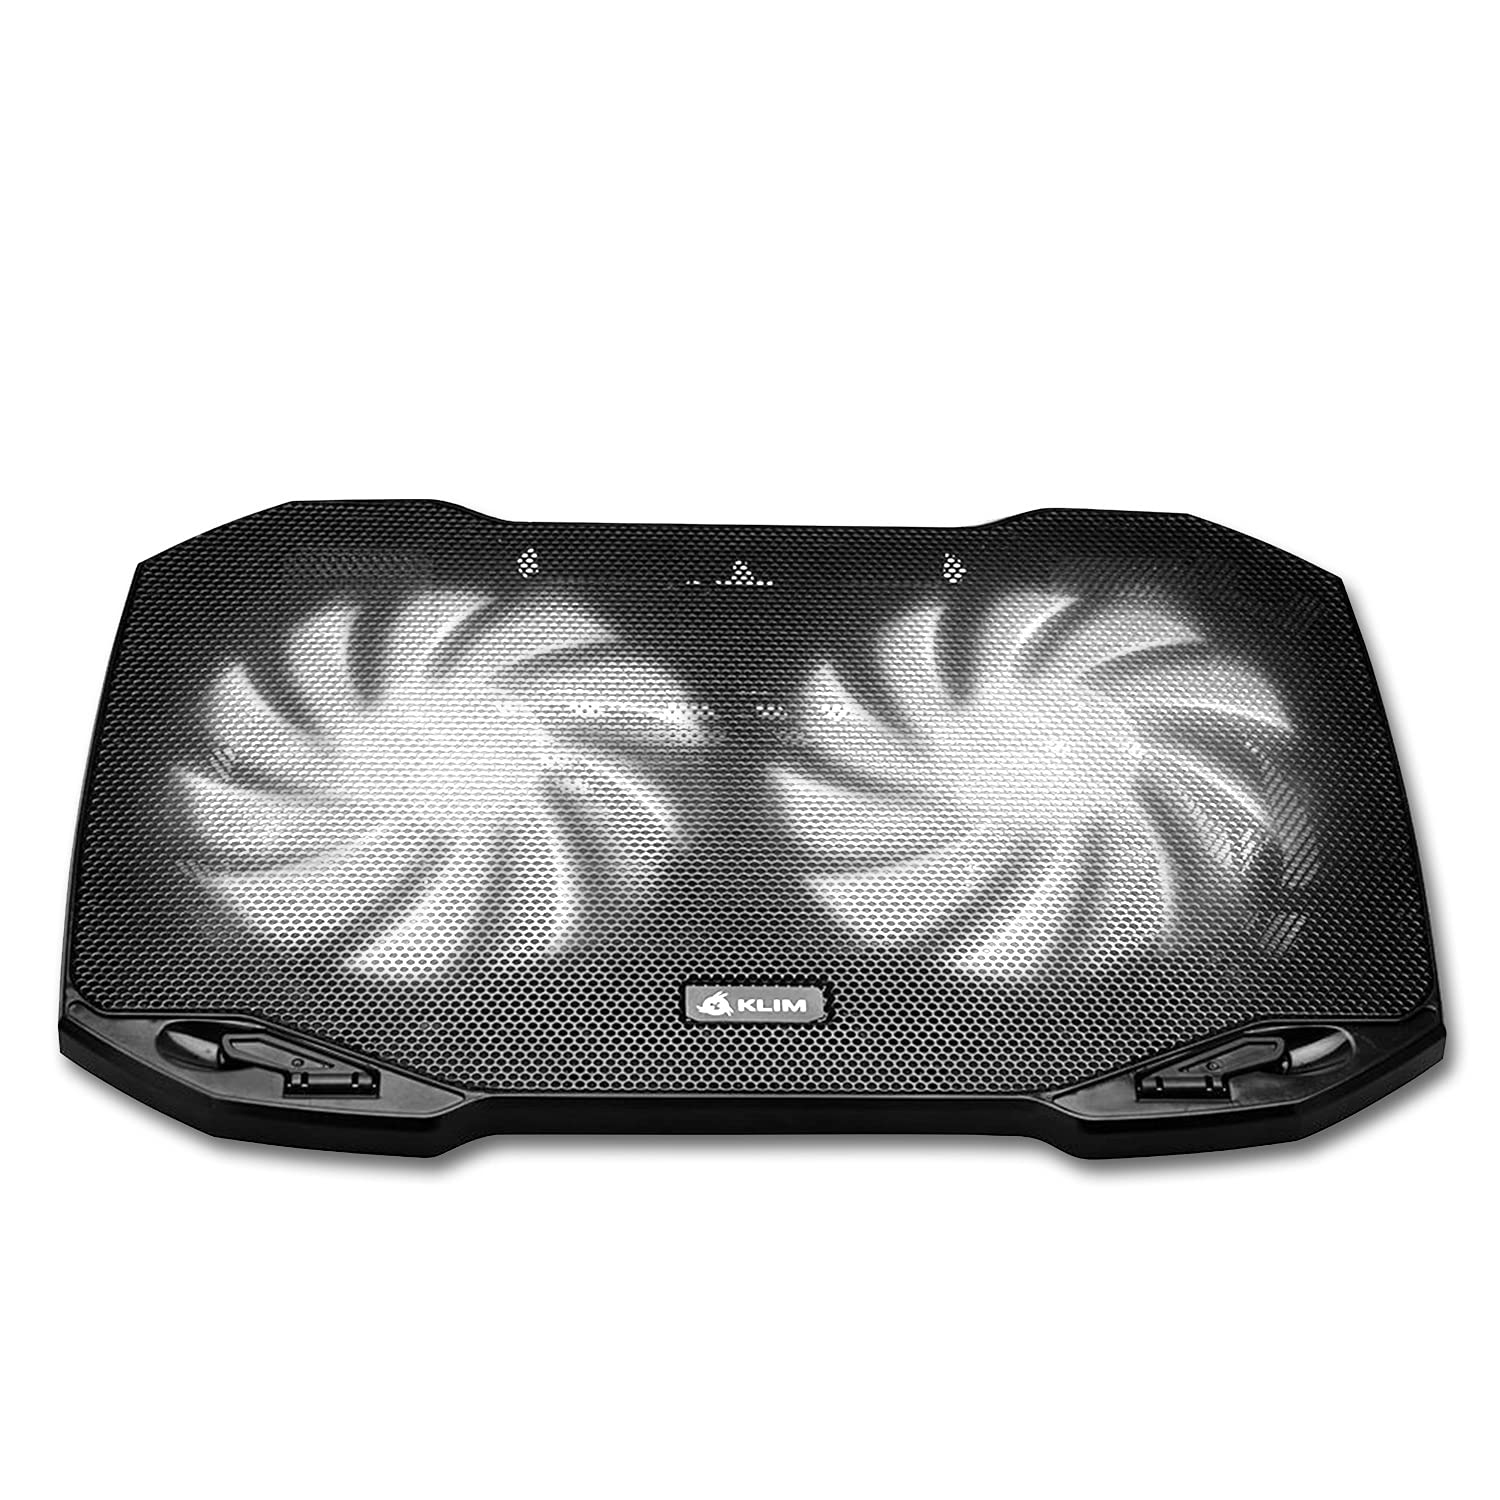 ?? KLIM Pro Laptop Cooling Pad - The Most Powerful Slim PC Fan Cooler for Computer - Rapid Cooling Action - 2 Fans Ventilate